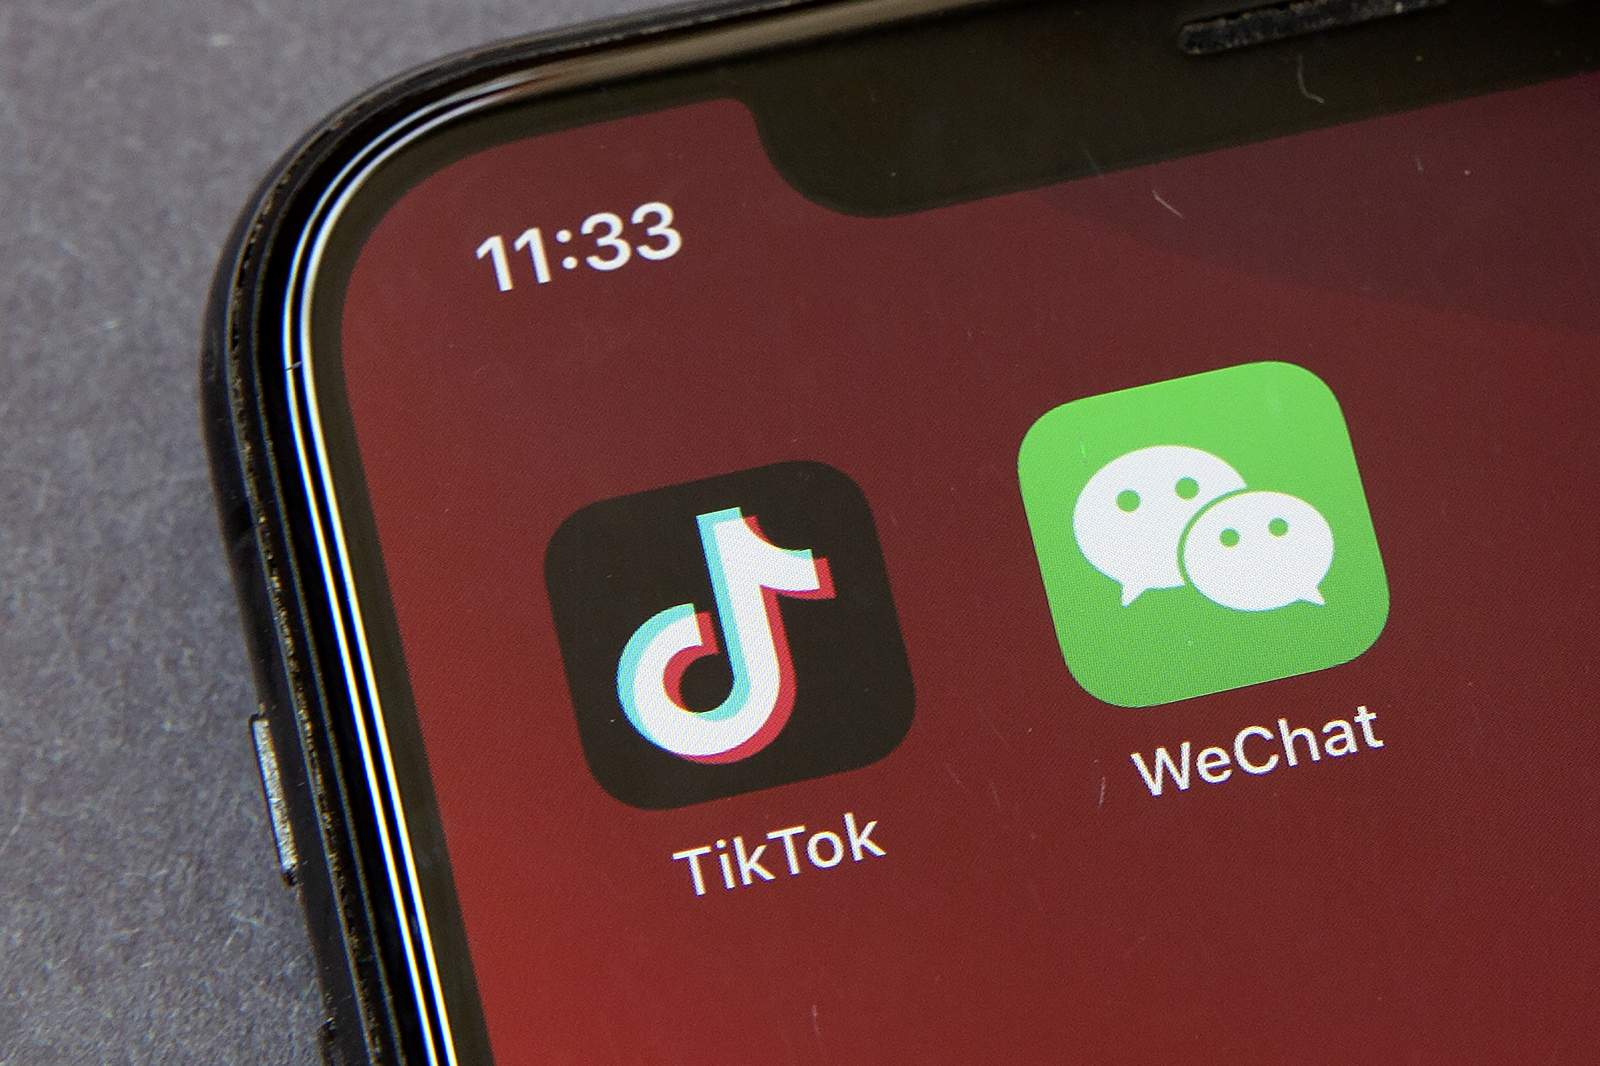 Q&A: What does banning TikTok and WeChat mean for users?